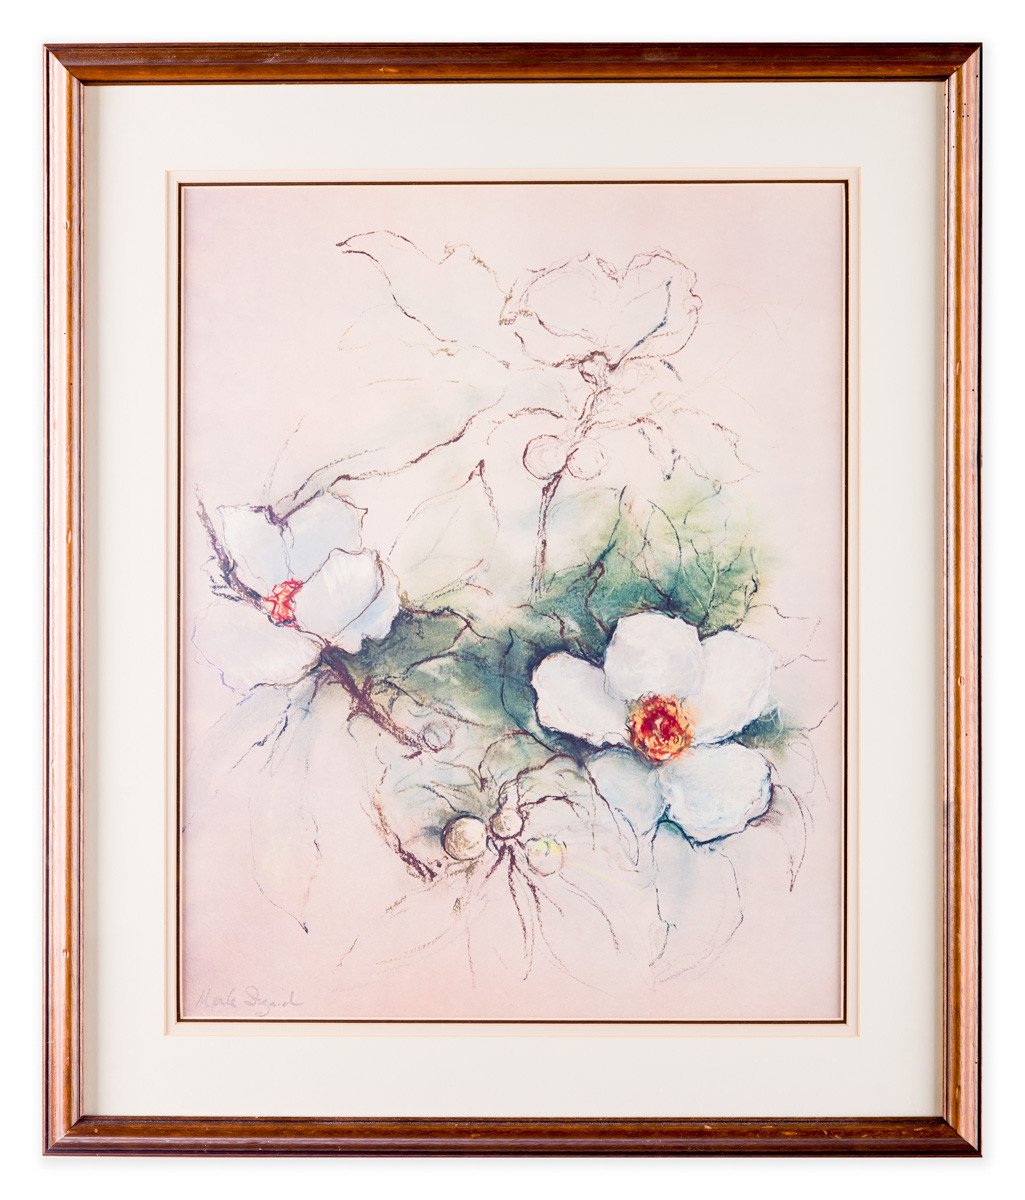 Sweet Magnolia - by Merle Izard - Lithograph - Framed Art